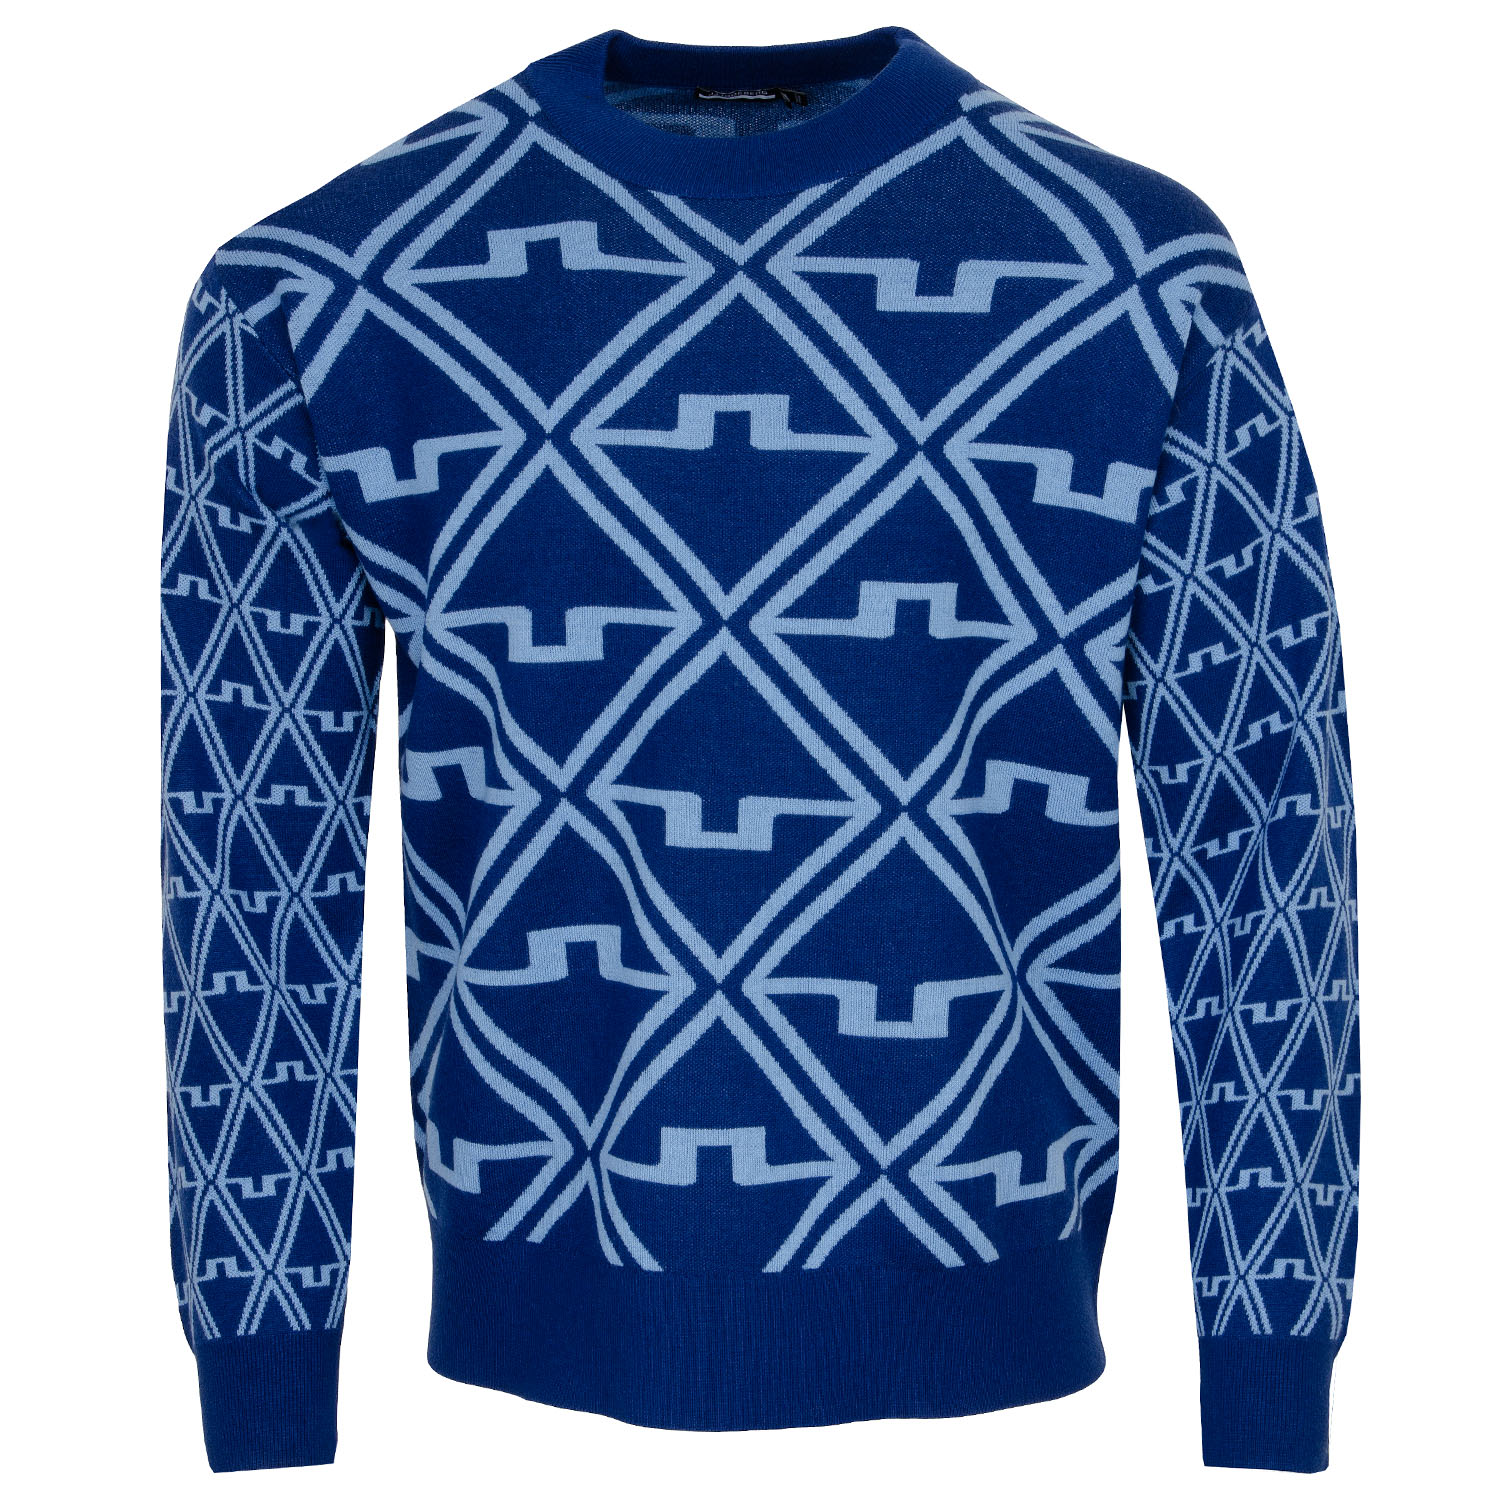 J Lindeberg Isaac Jacquard Knitted Crew Neck Sweater Estate Blue ...